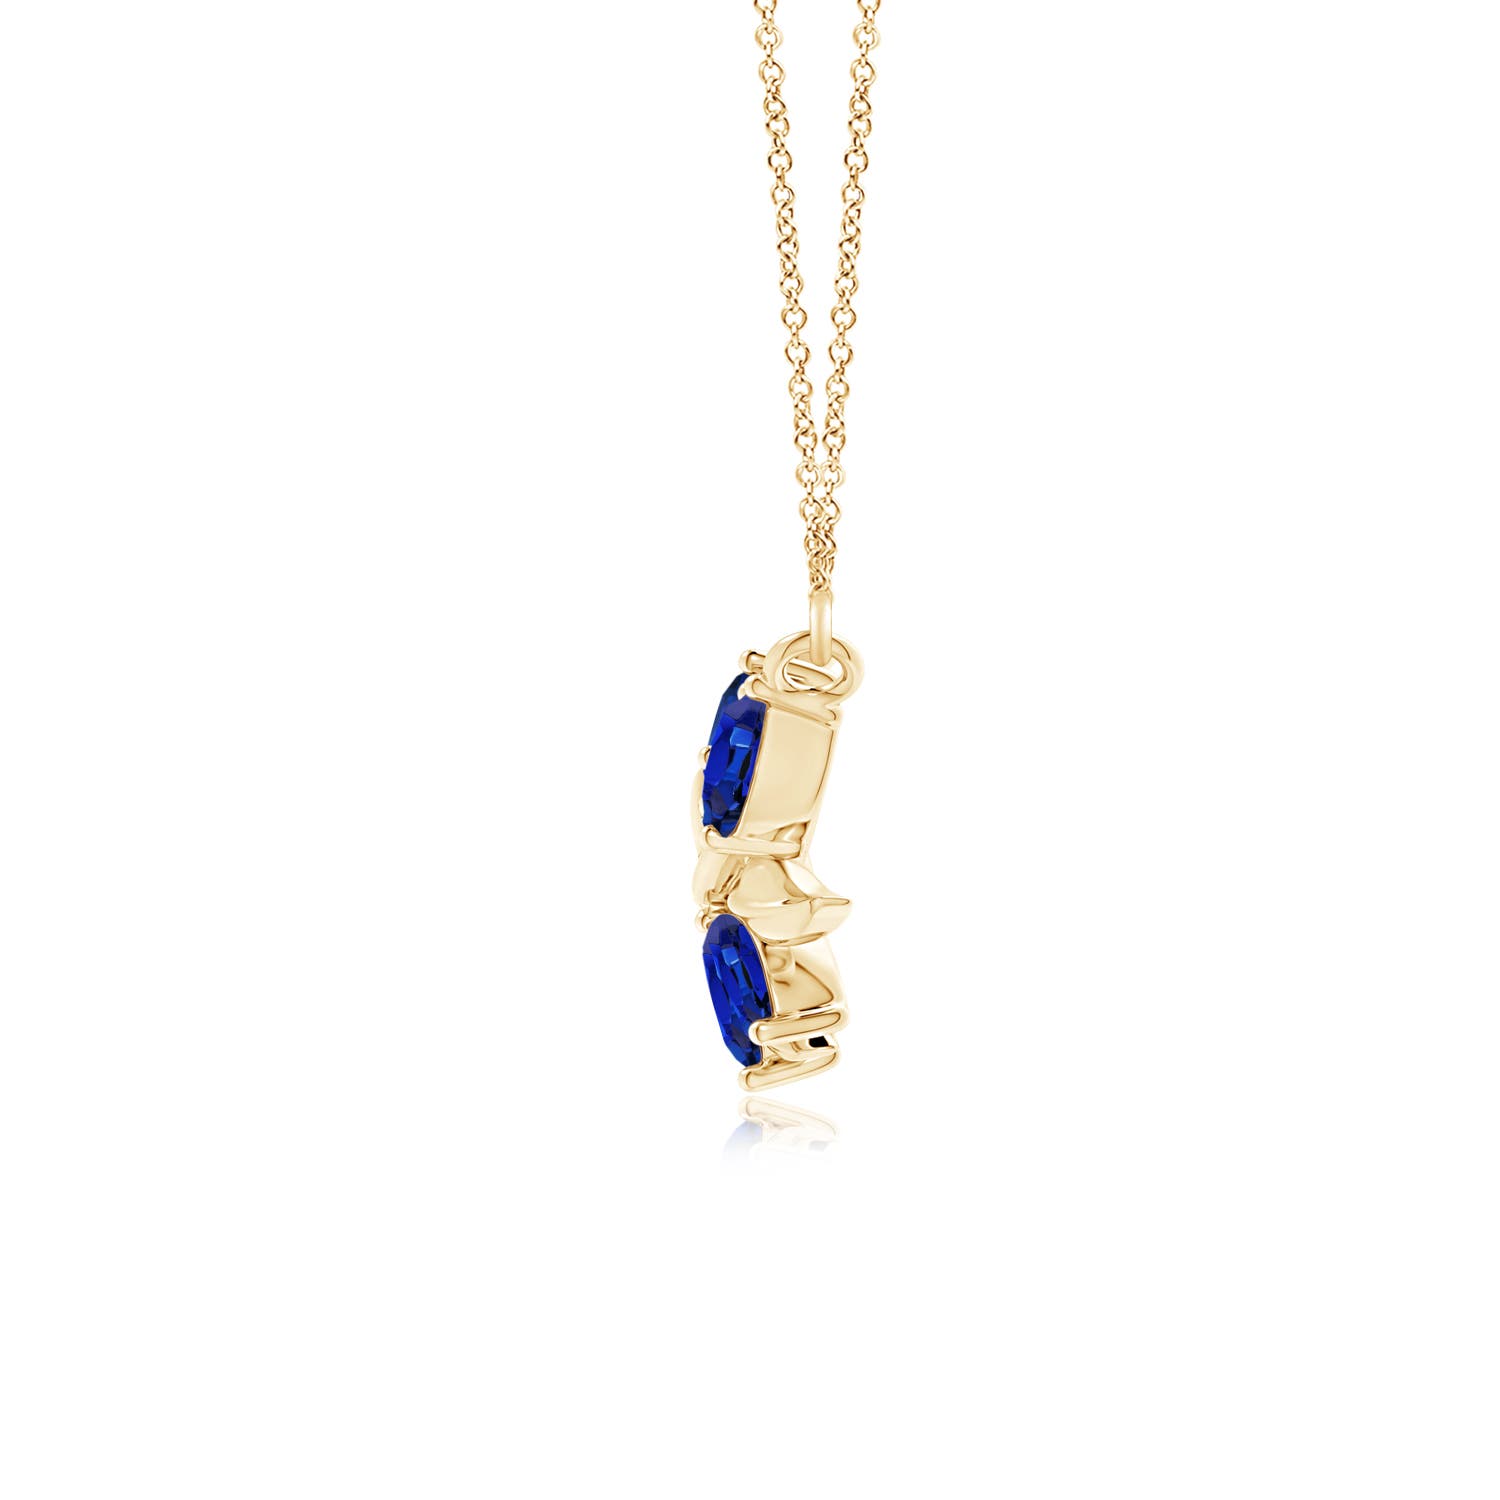 AAA - Blue Sapphire / 1.25 CT / 14 KT Yellow Gold